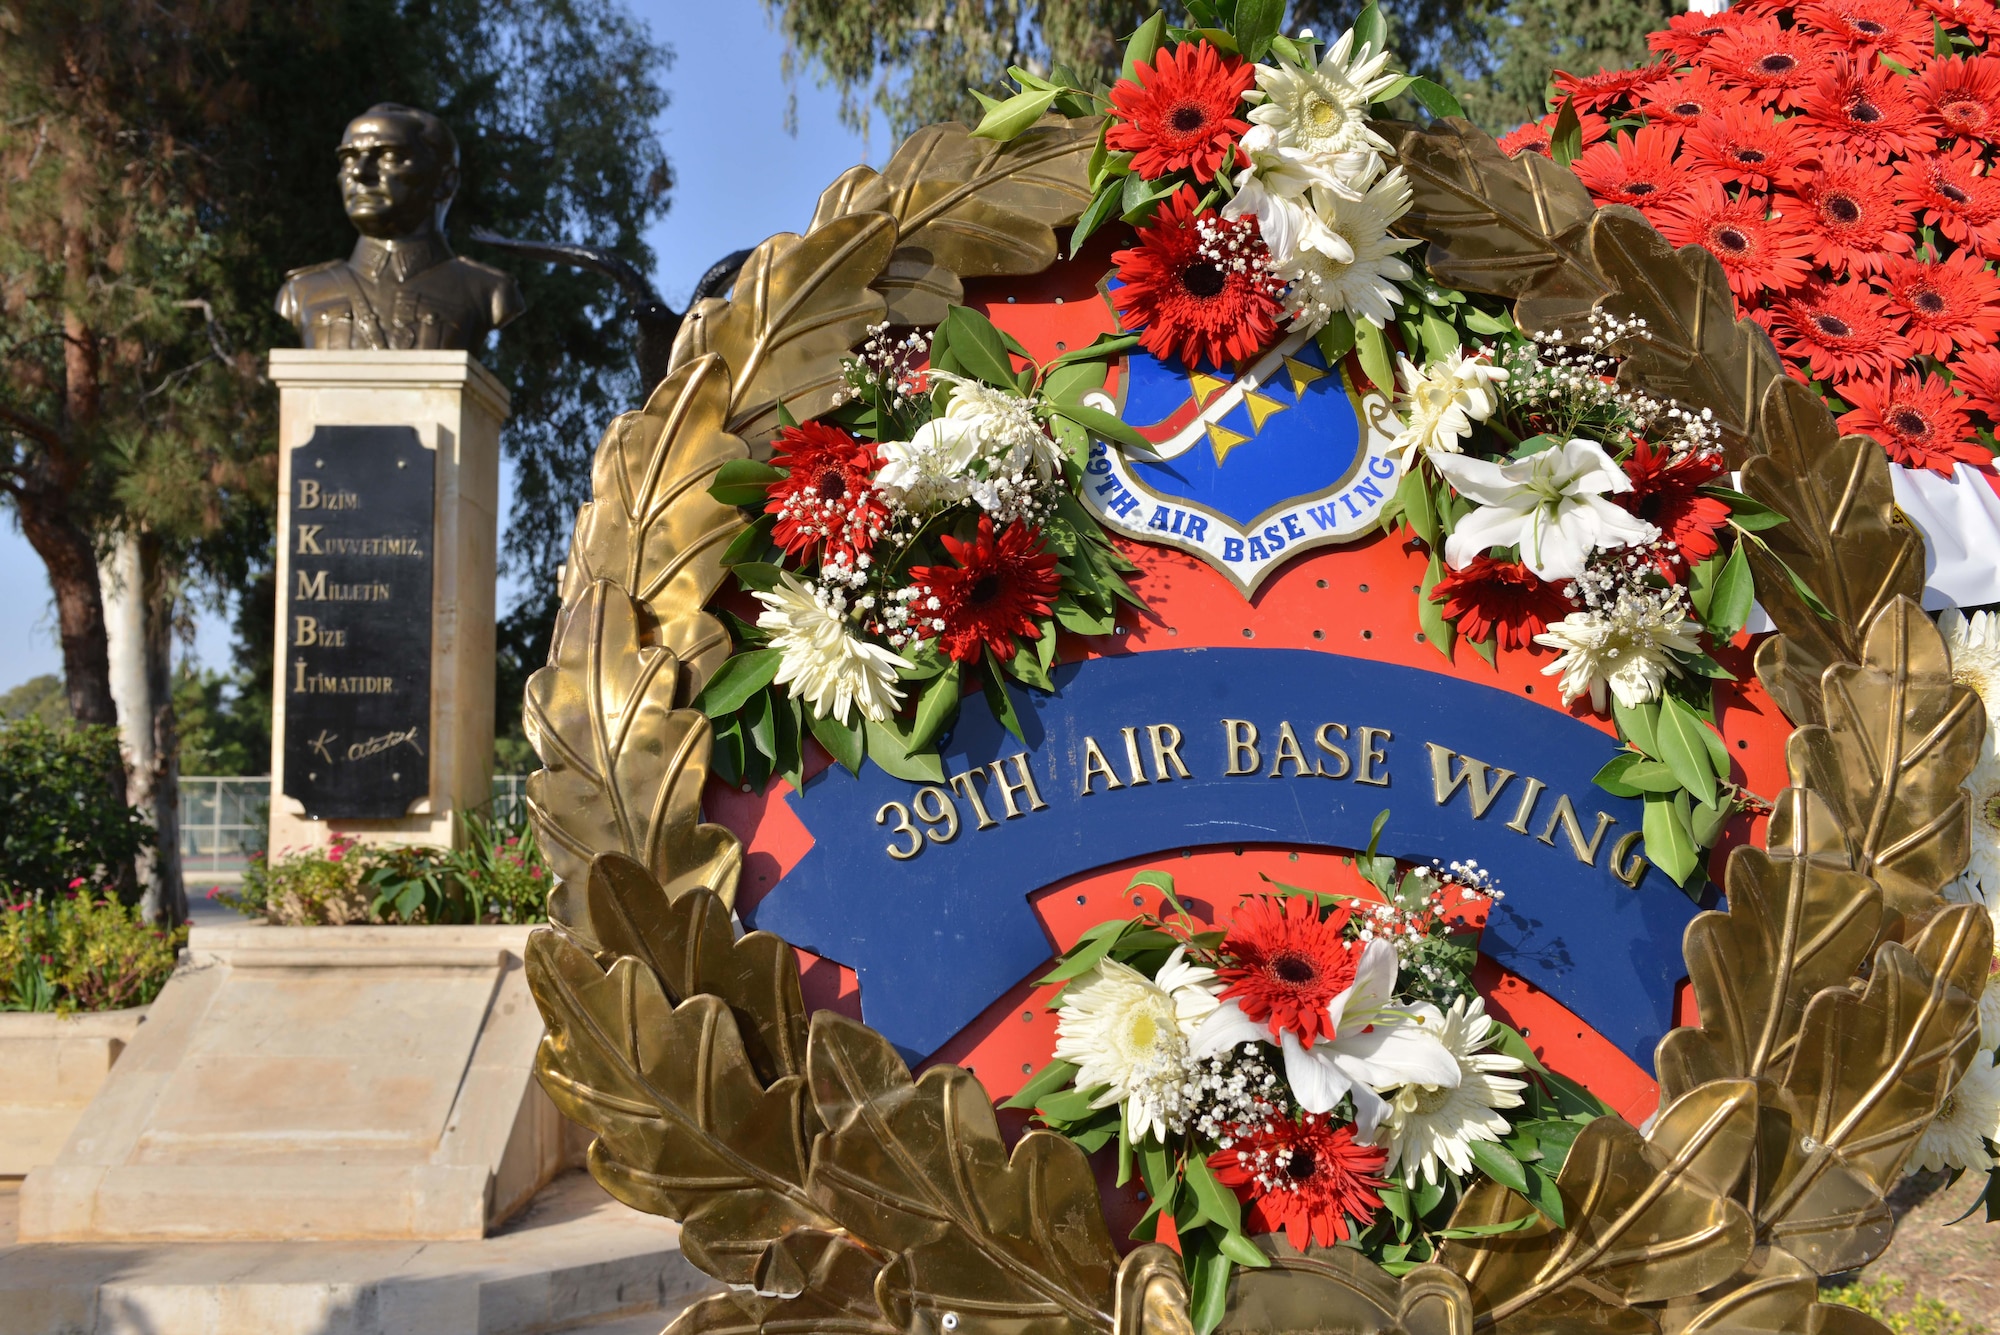 A wreath offered by 39th Air Base Wing personnel sits by a memorial statue of Mustafa Kemal Ataturk Nov. 10, 2016, at Incirlik Air Base, Turkey. Wreaths were offered by 10th Tanker Base partners and displayed by Ataturk's statue. (U.S. Air Force photo by Senior Airman John Nieves Camacho)